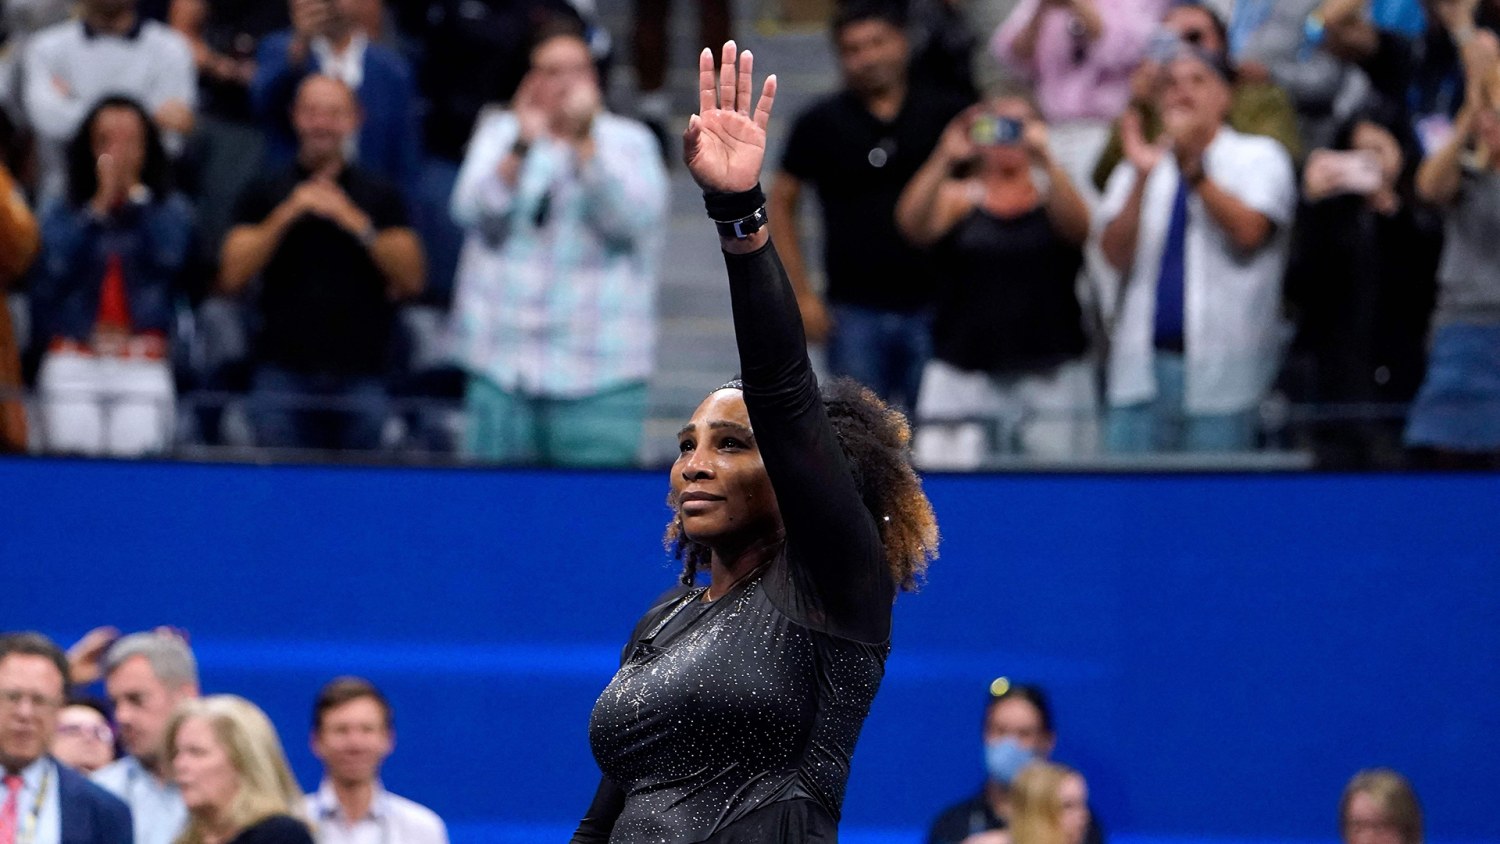 Serena Williams uses perfect tiebreaker to avoid loss in NYC - The San  Diego Union-Tribune